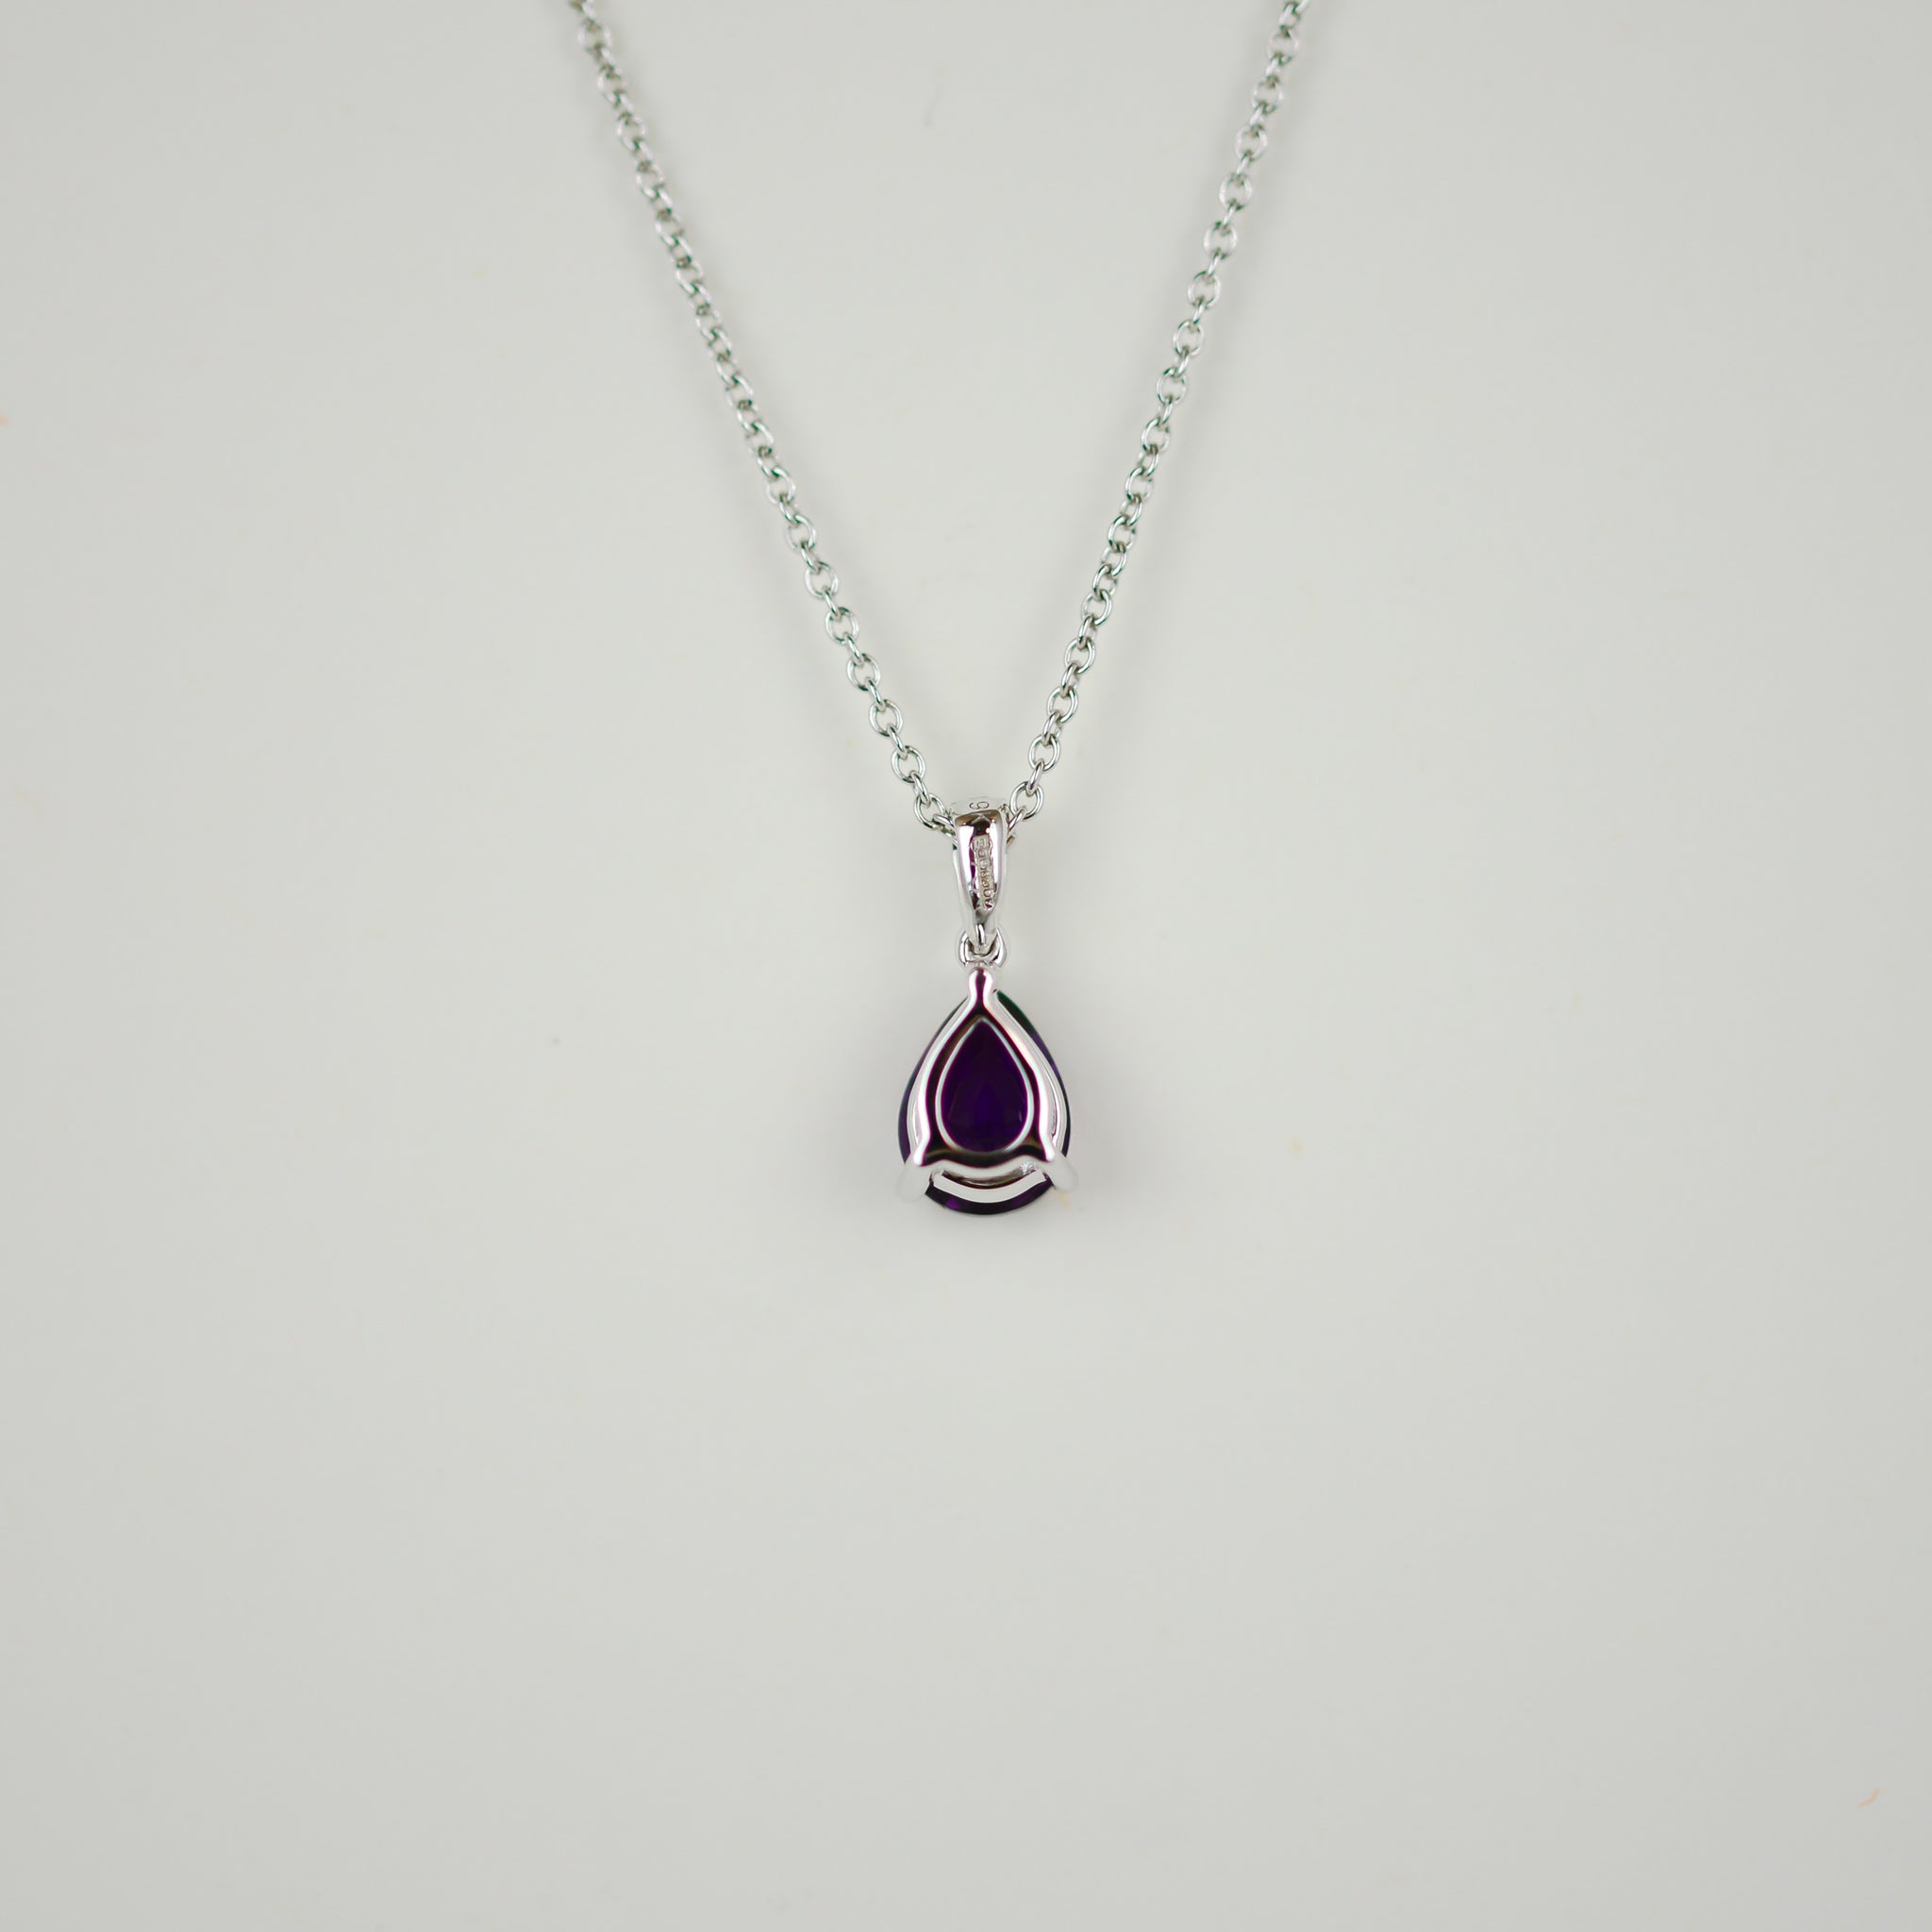 9ct White Gold 1.14ct Pear Amethyst and Diamond Pendant